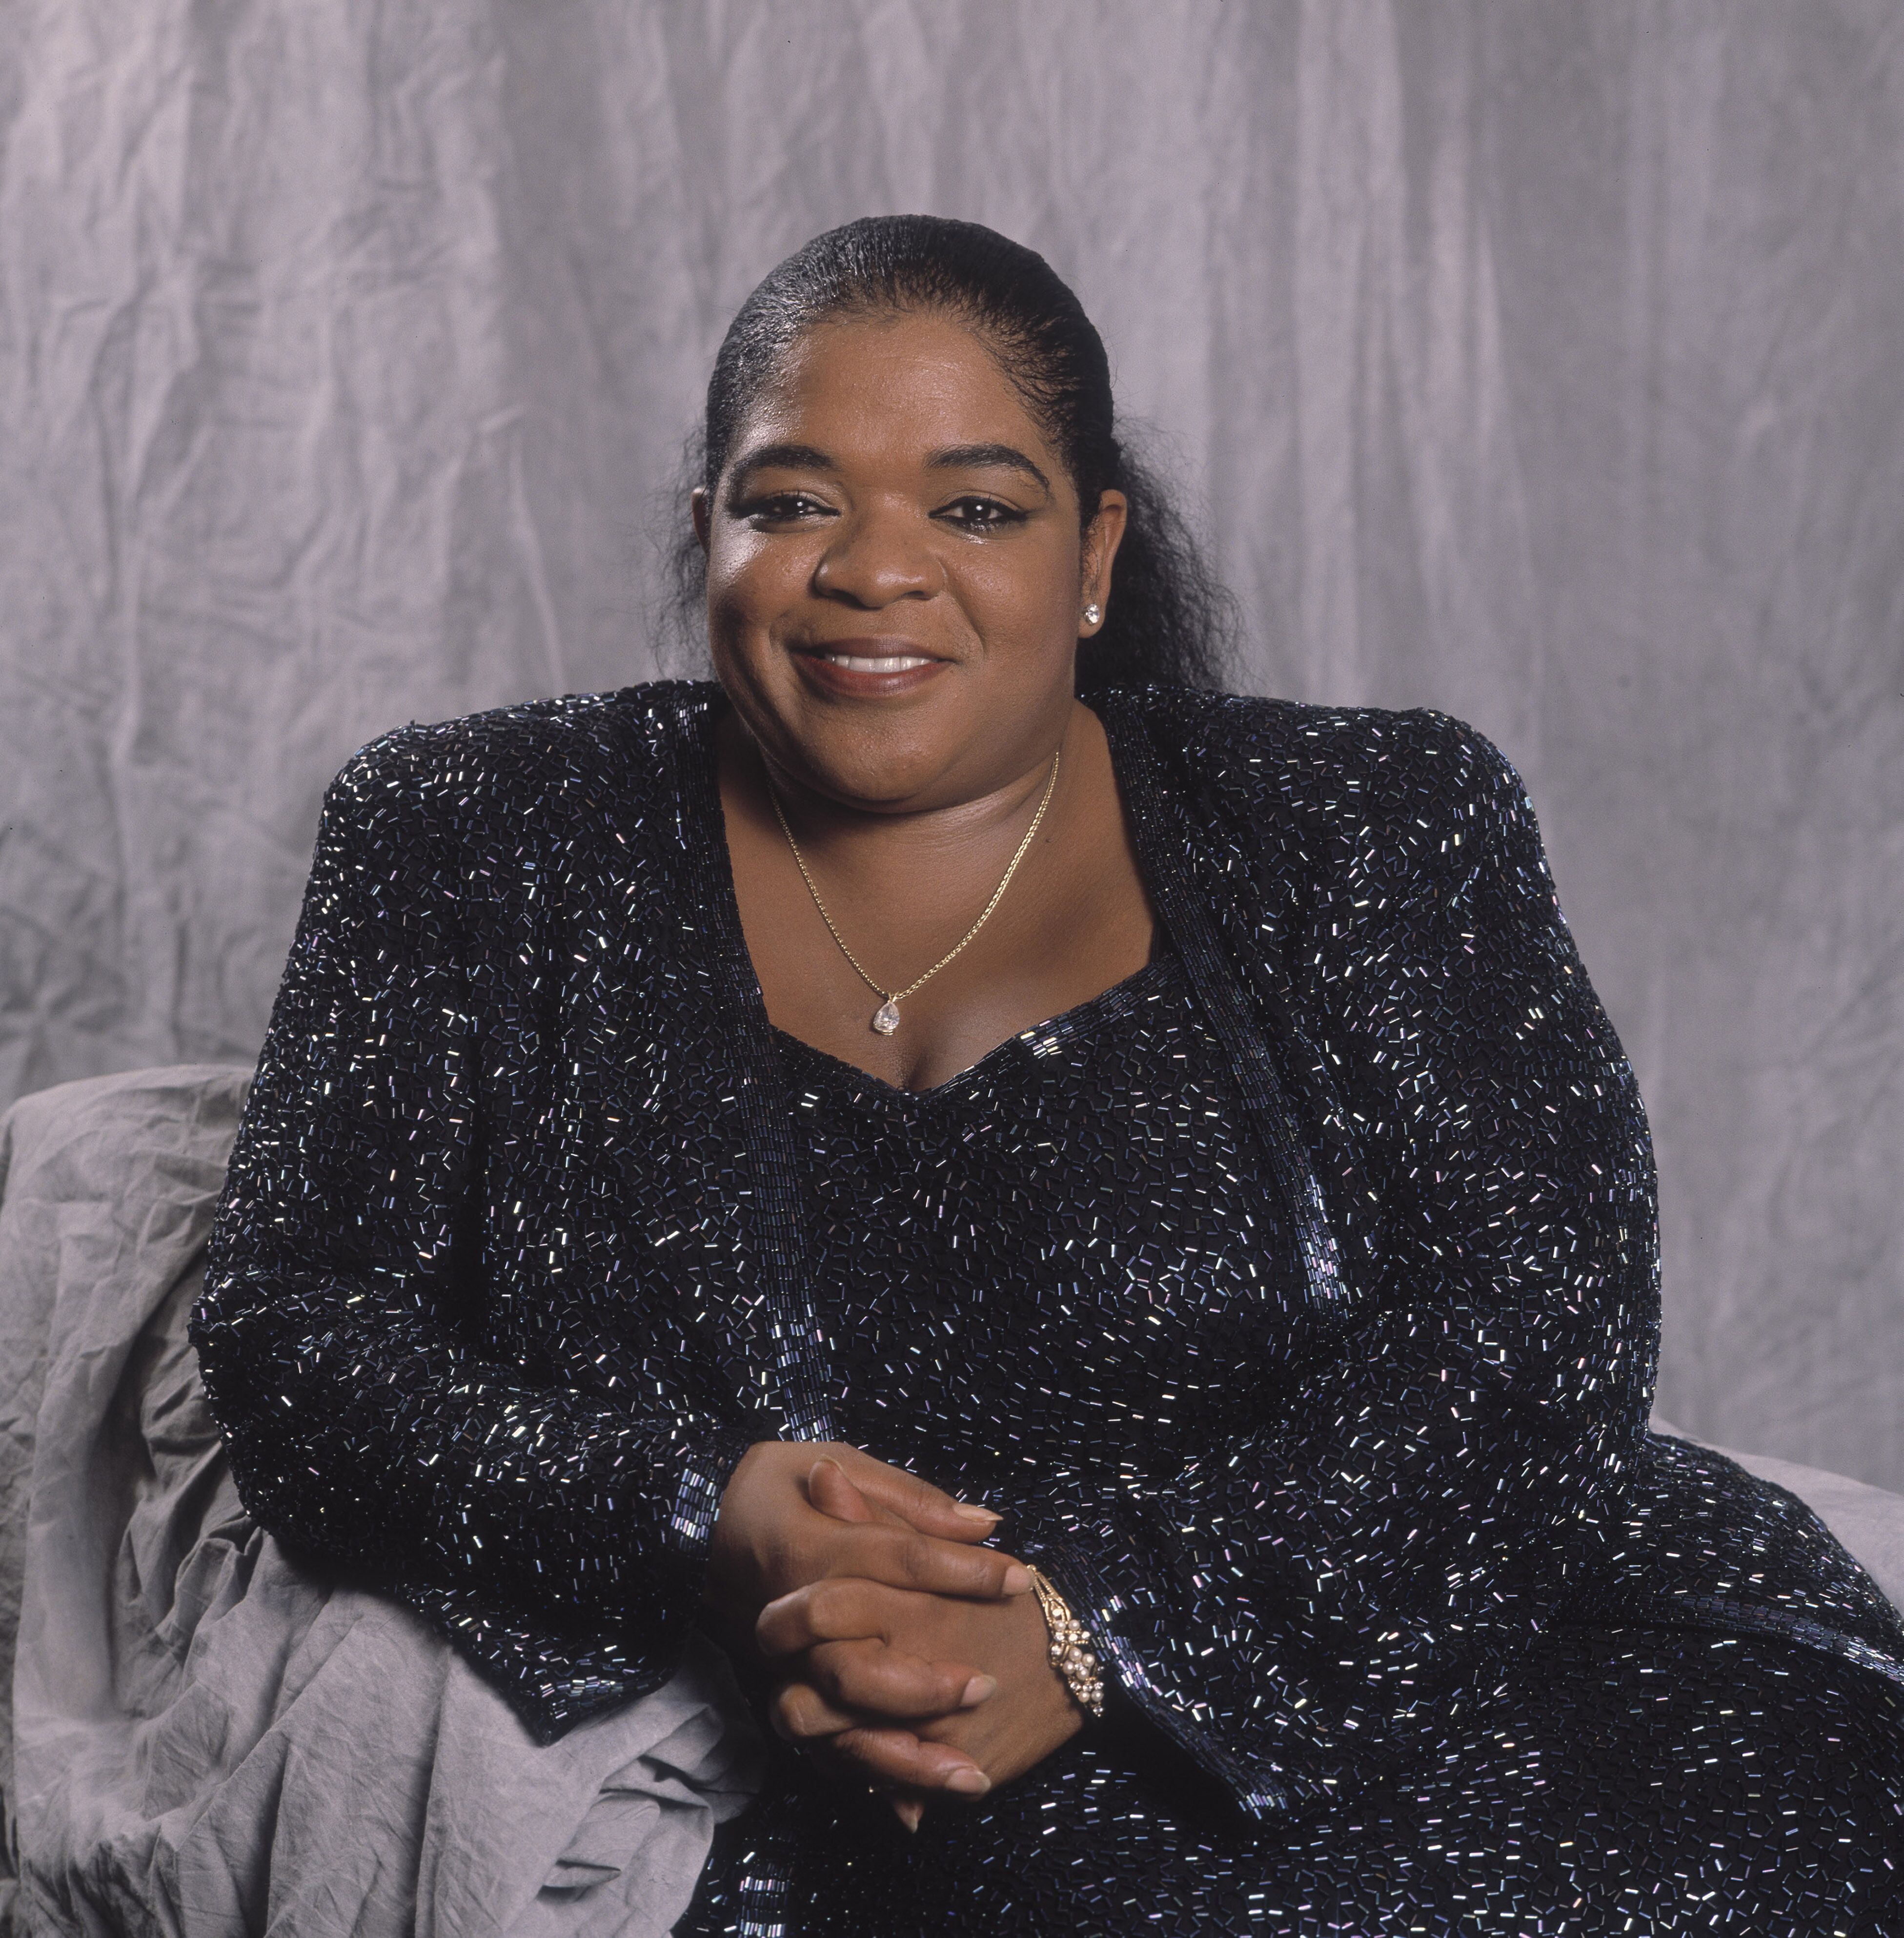 Nell Carter at the Aire Crown theater, Chicago, Illinois, in 1990 | Source: Getty Images